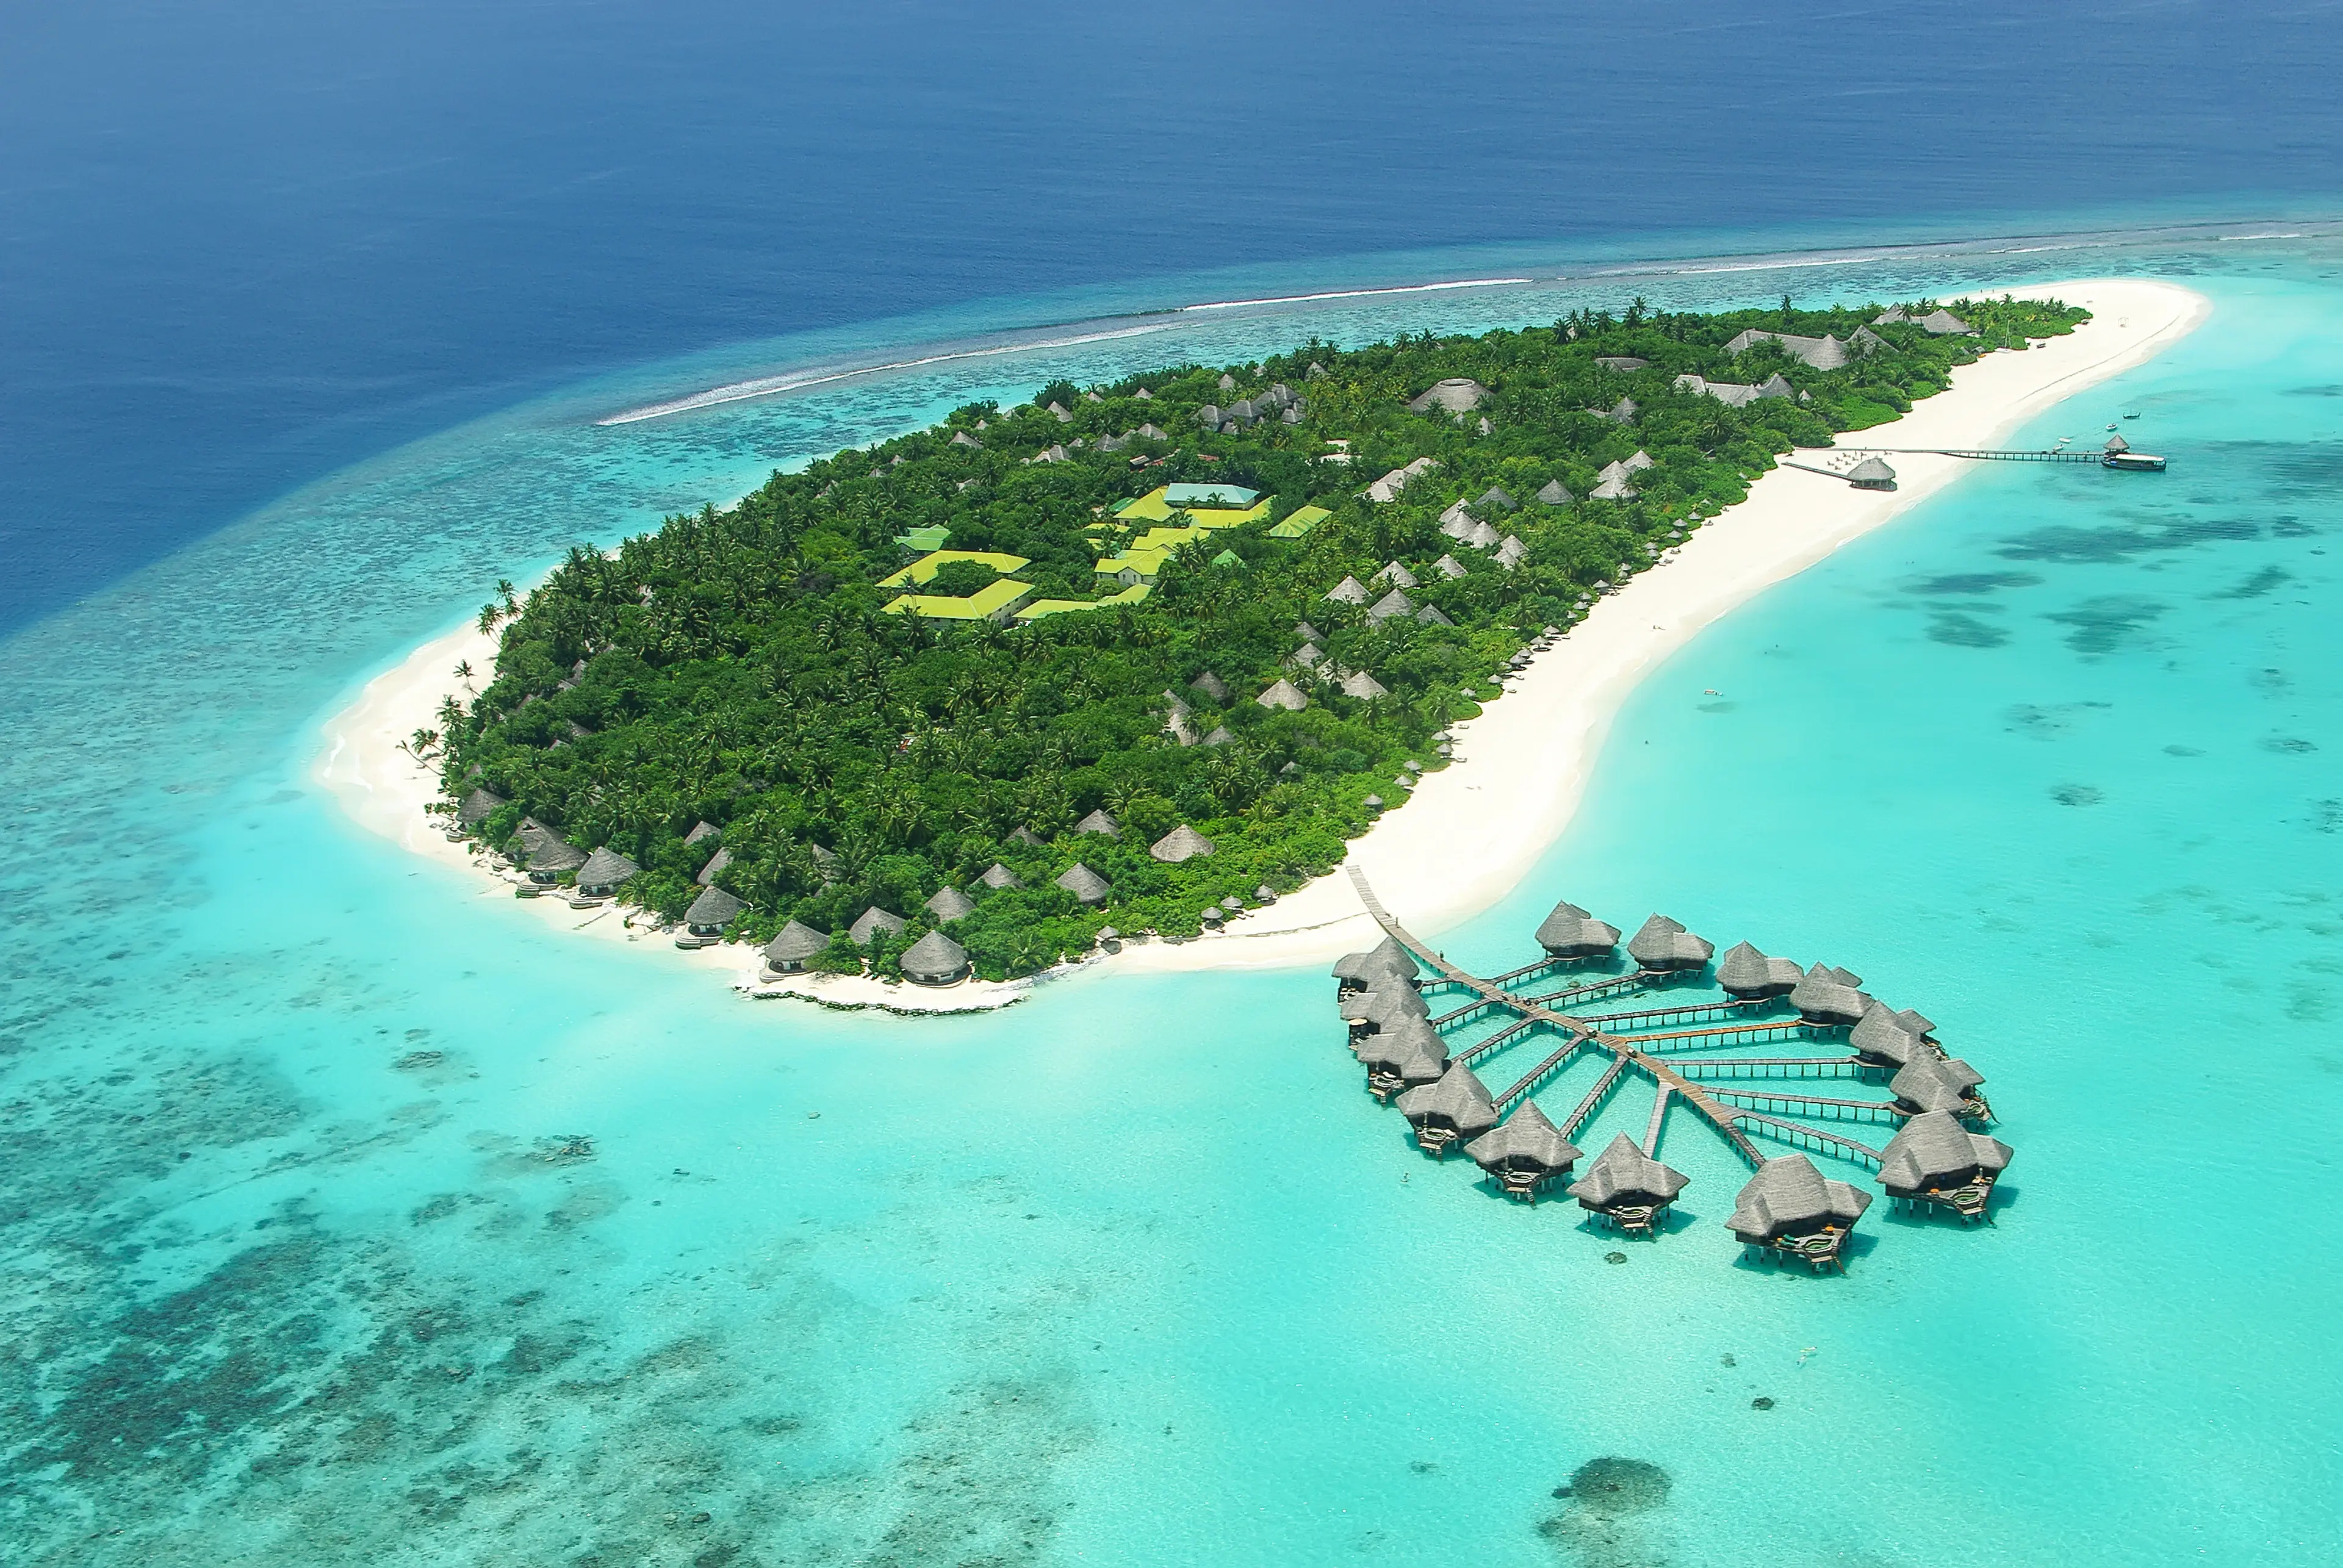 2-Day Exquisite Adventure to the Maldives